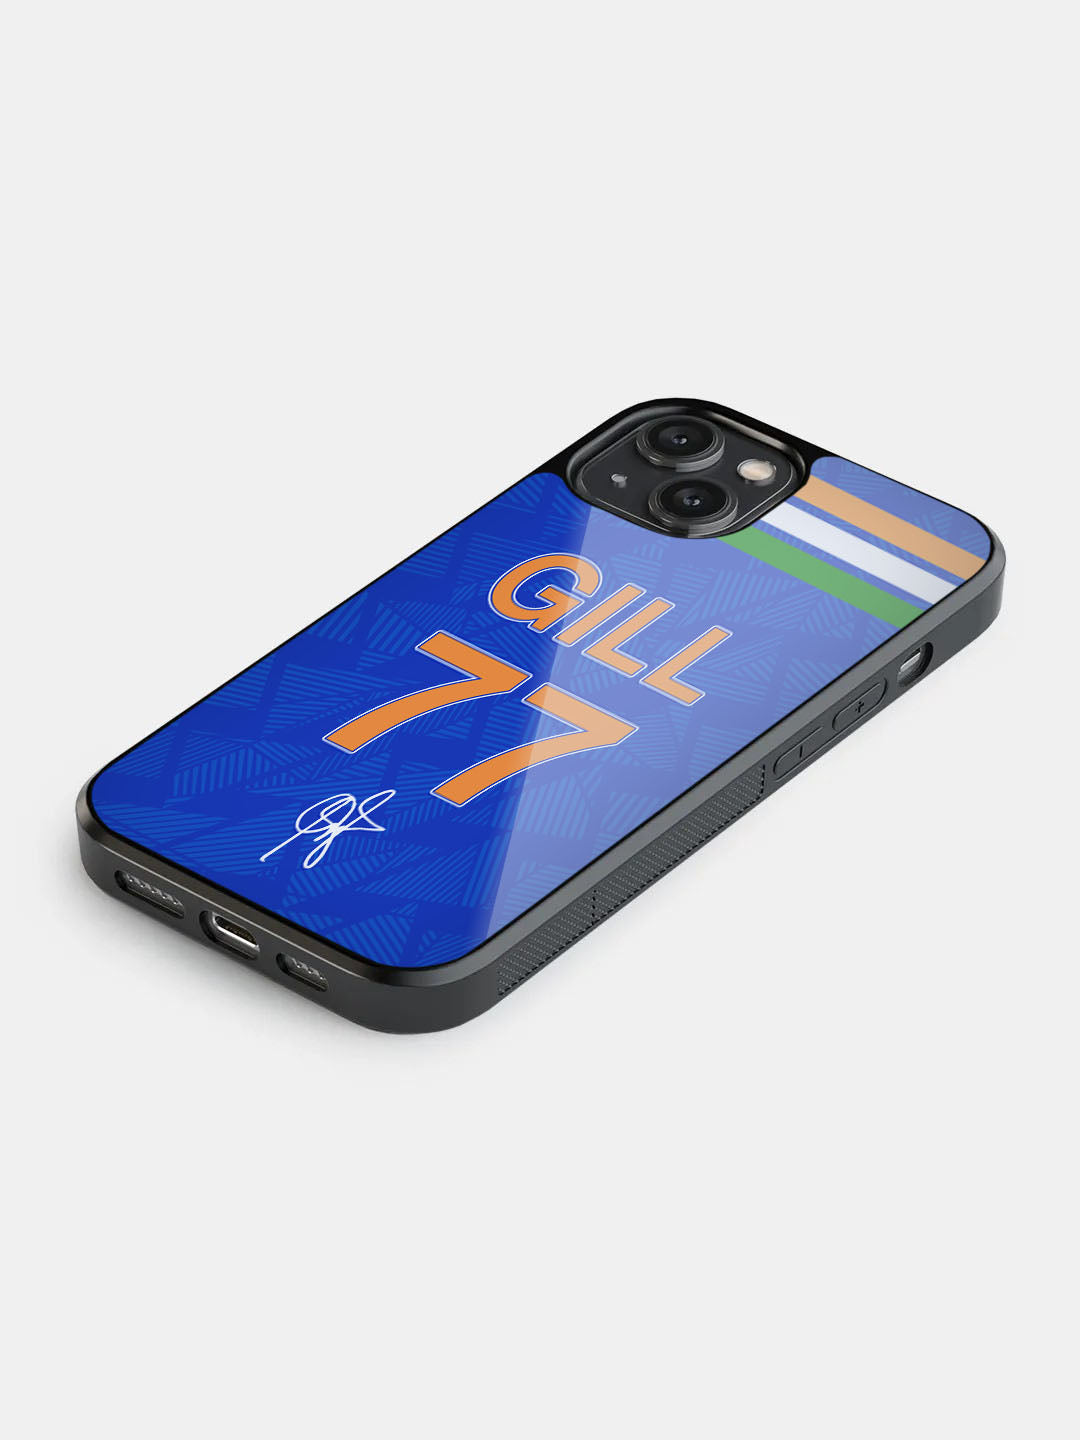 Shubhman Gill World Cup Jersey Glass Phone Case